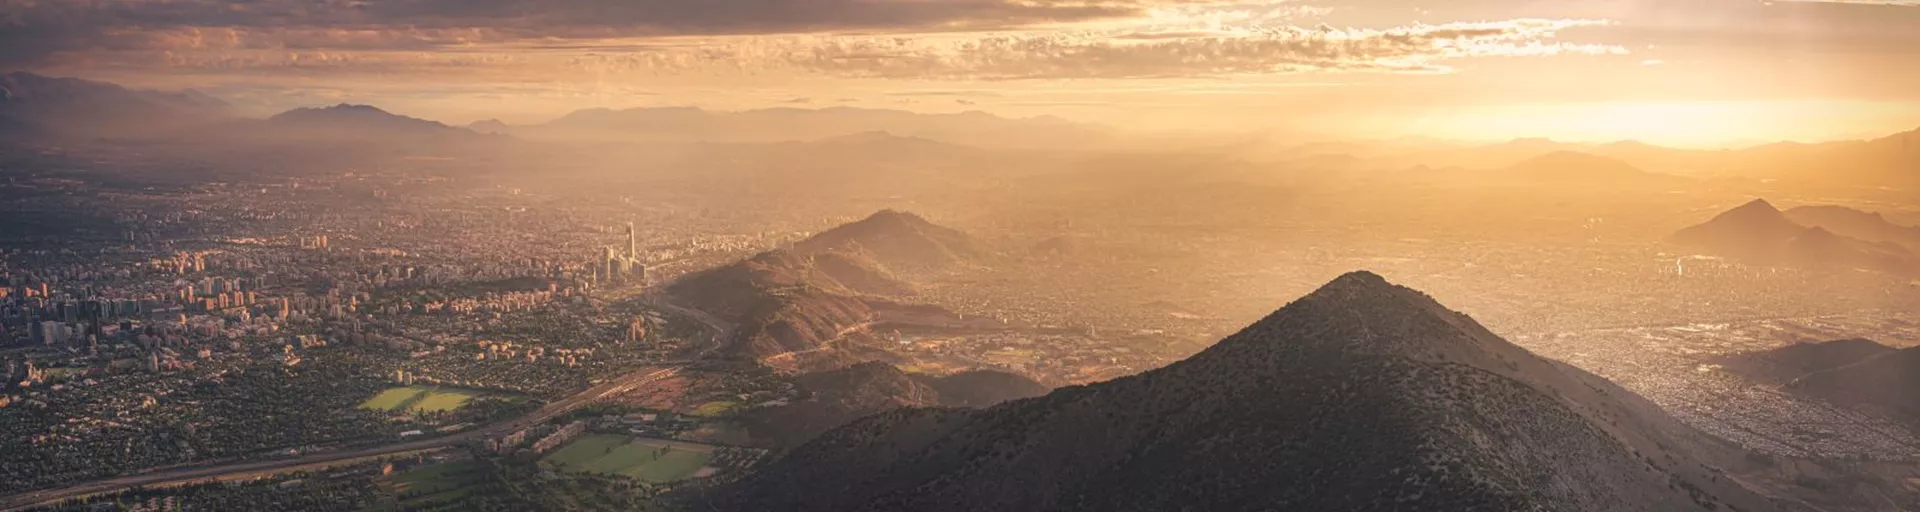 Sunset over Santiago in Chile